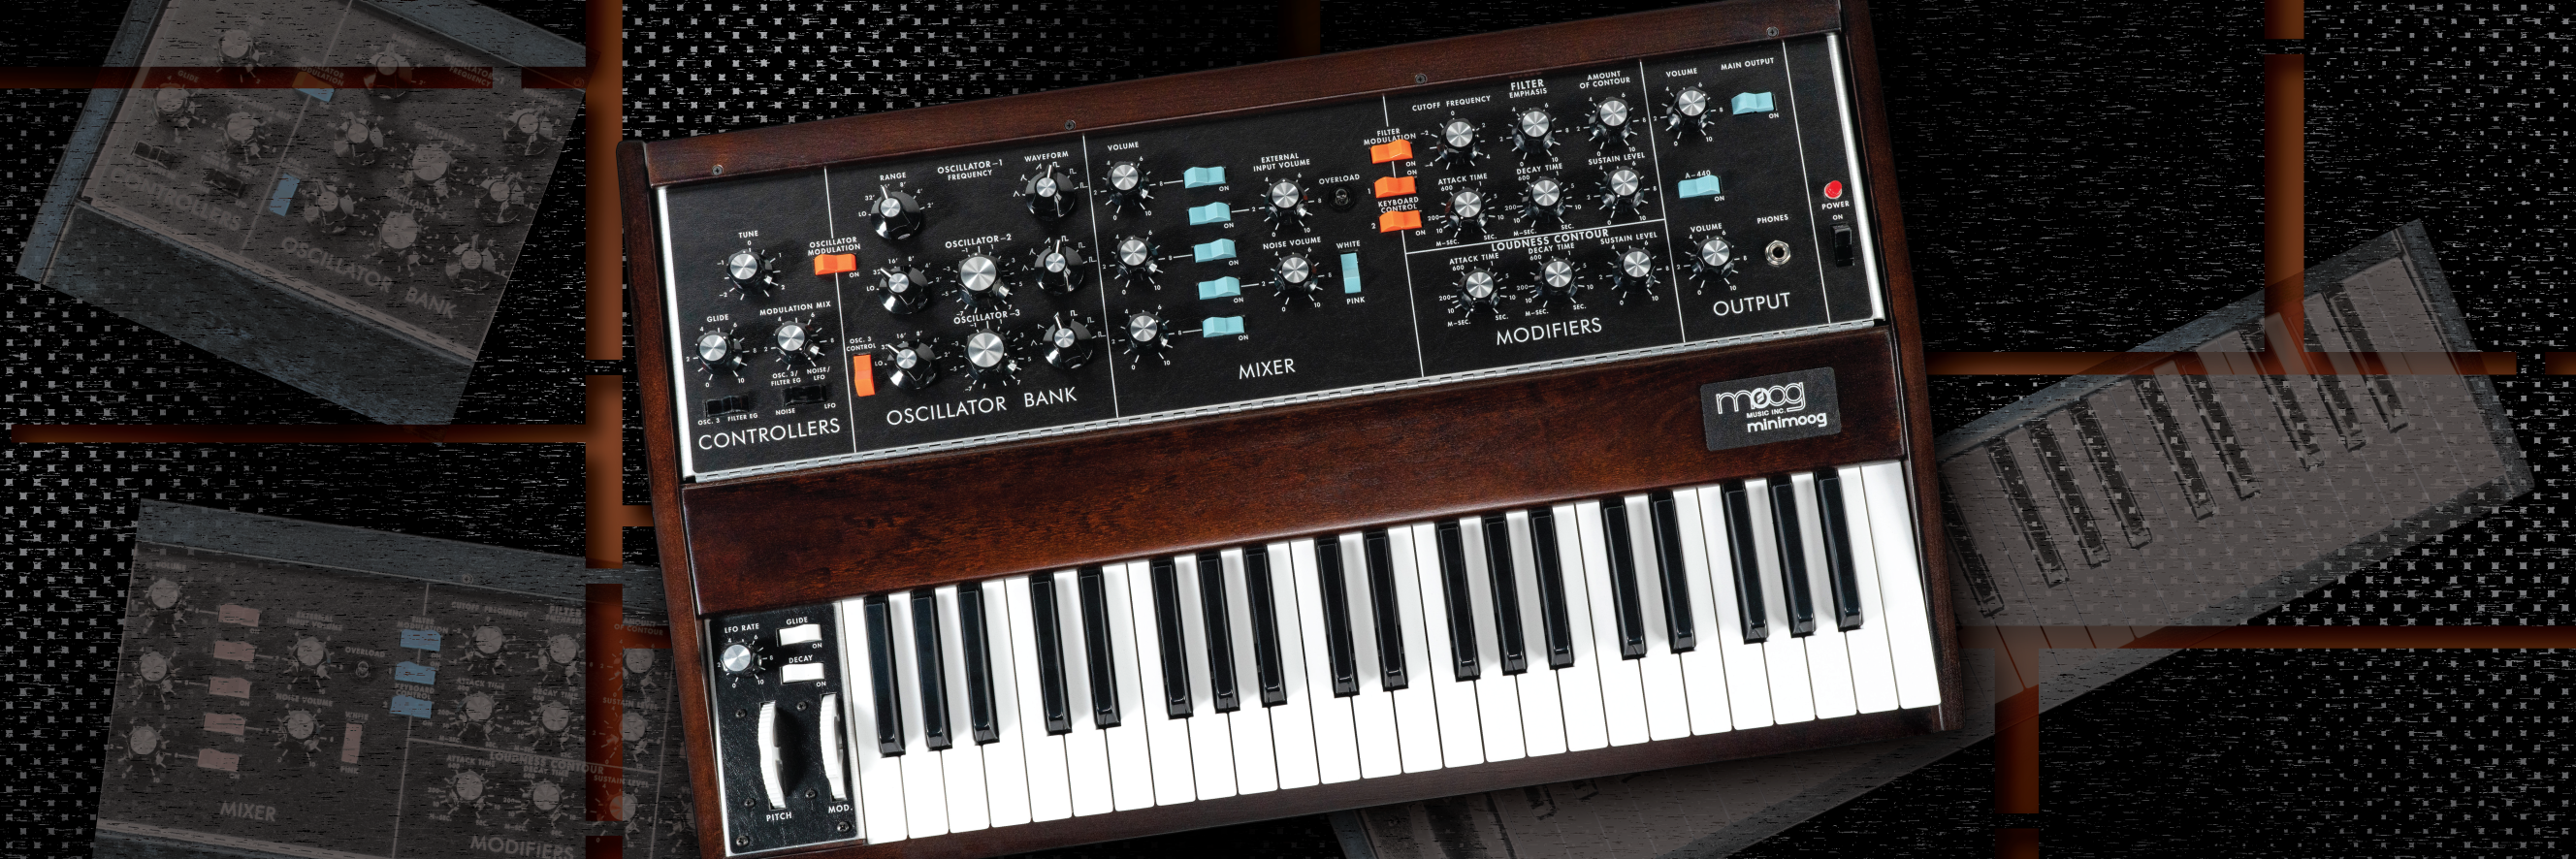 NAMM 2022: Meet the 88-note hammer action MIDI keyboard that